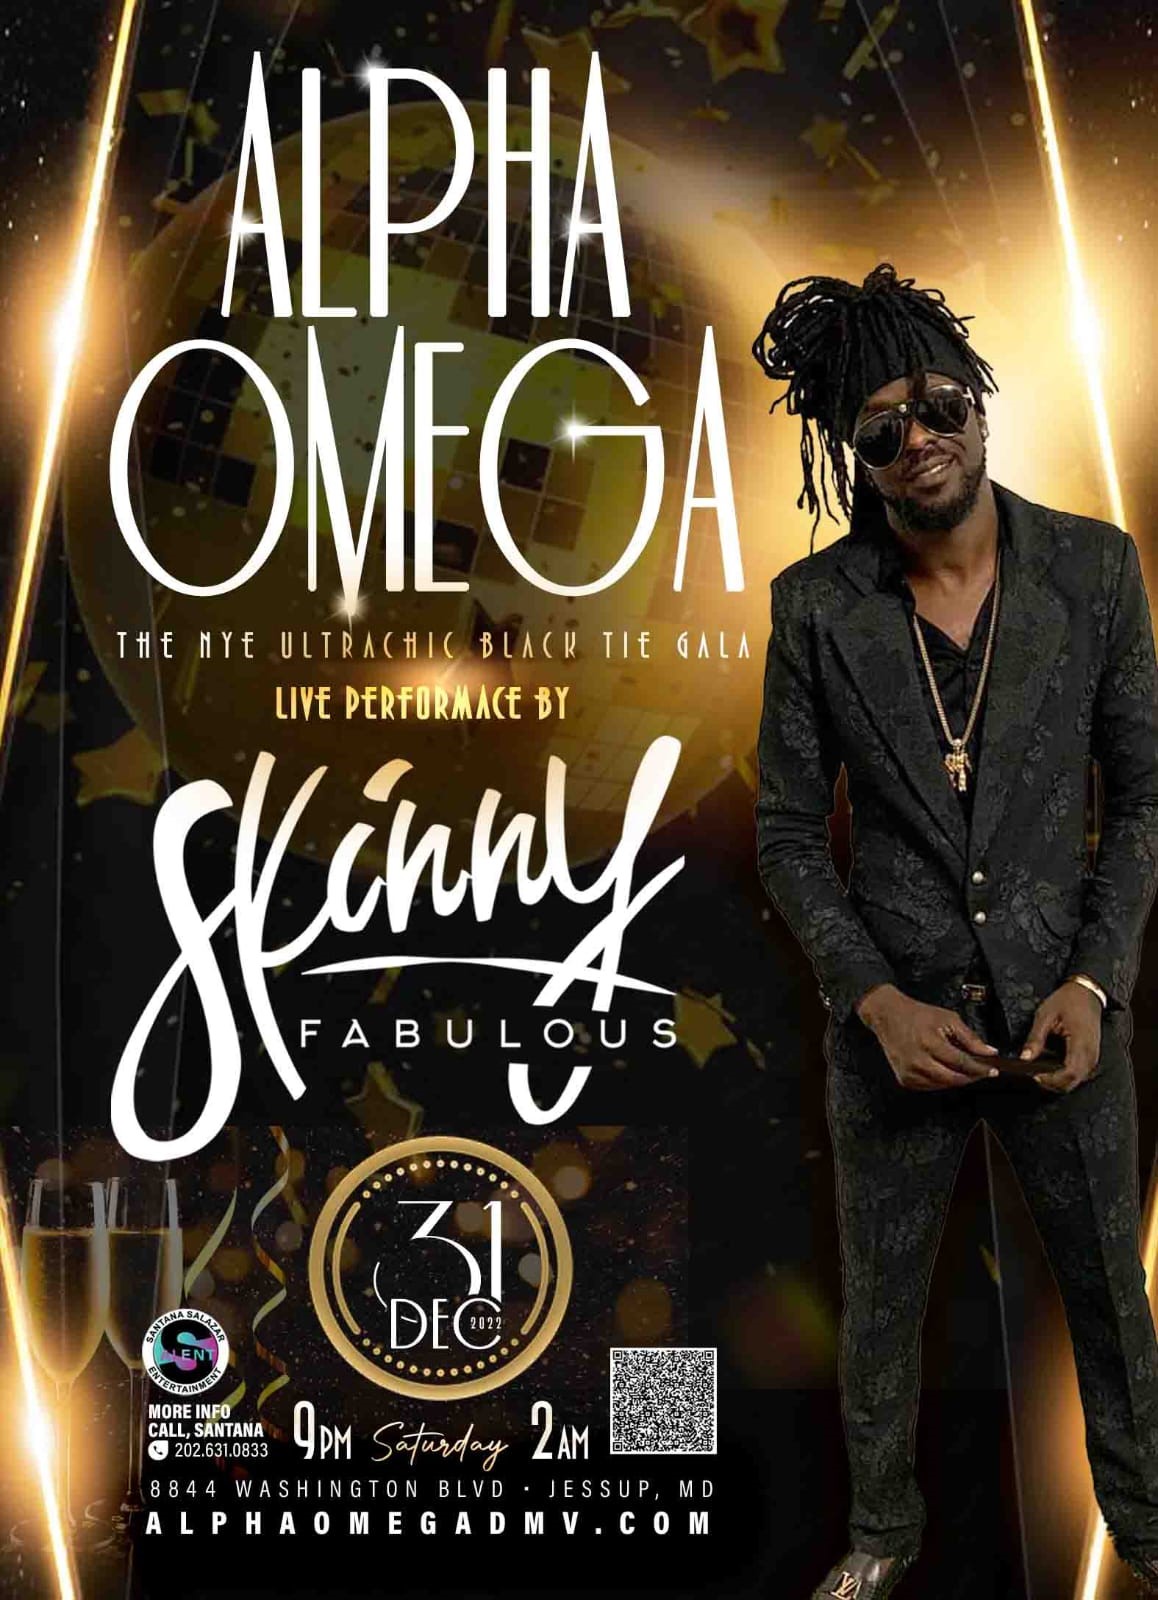 ALPHA & OMEGA - THE NYE ULTRACHIC BLACK-TIE GALA  on Dec 31, 21:00@8844 Washington Blvd Jessup, MD - Buy tickets and Get information on www.fetefinders.com tickets.fetefinders.com